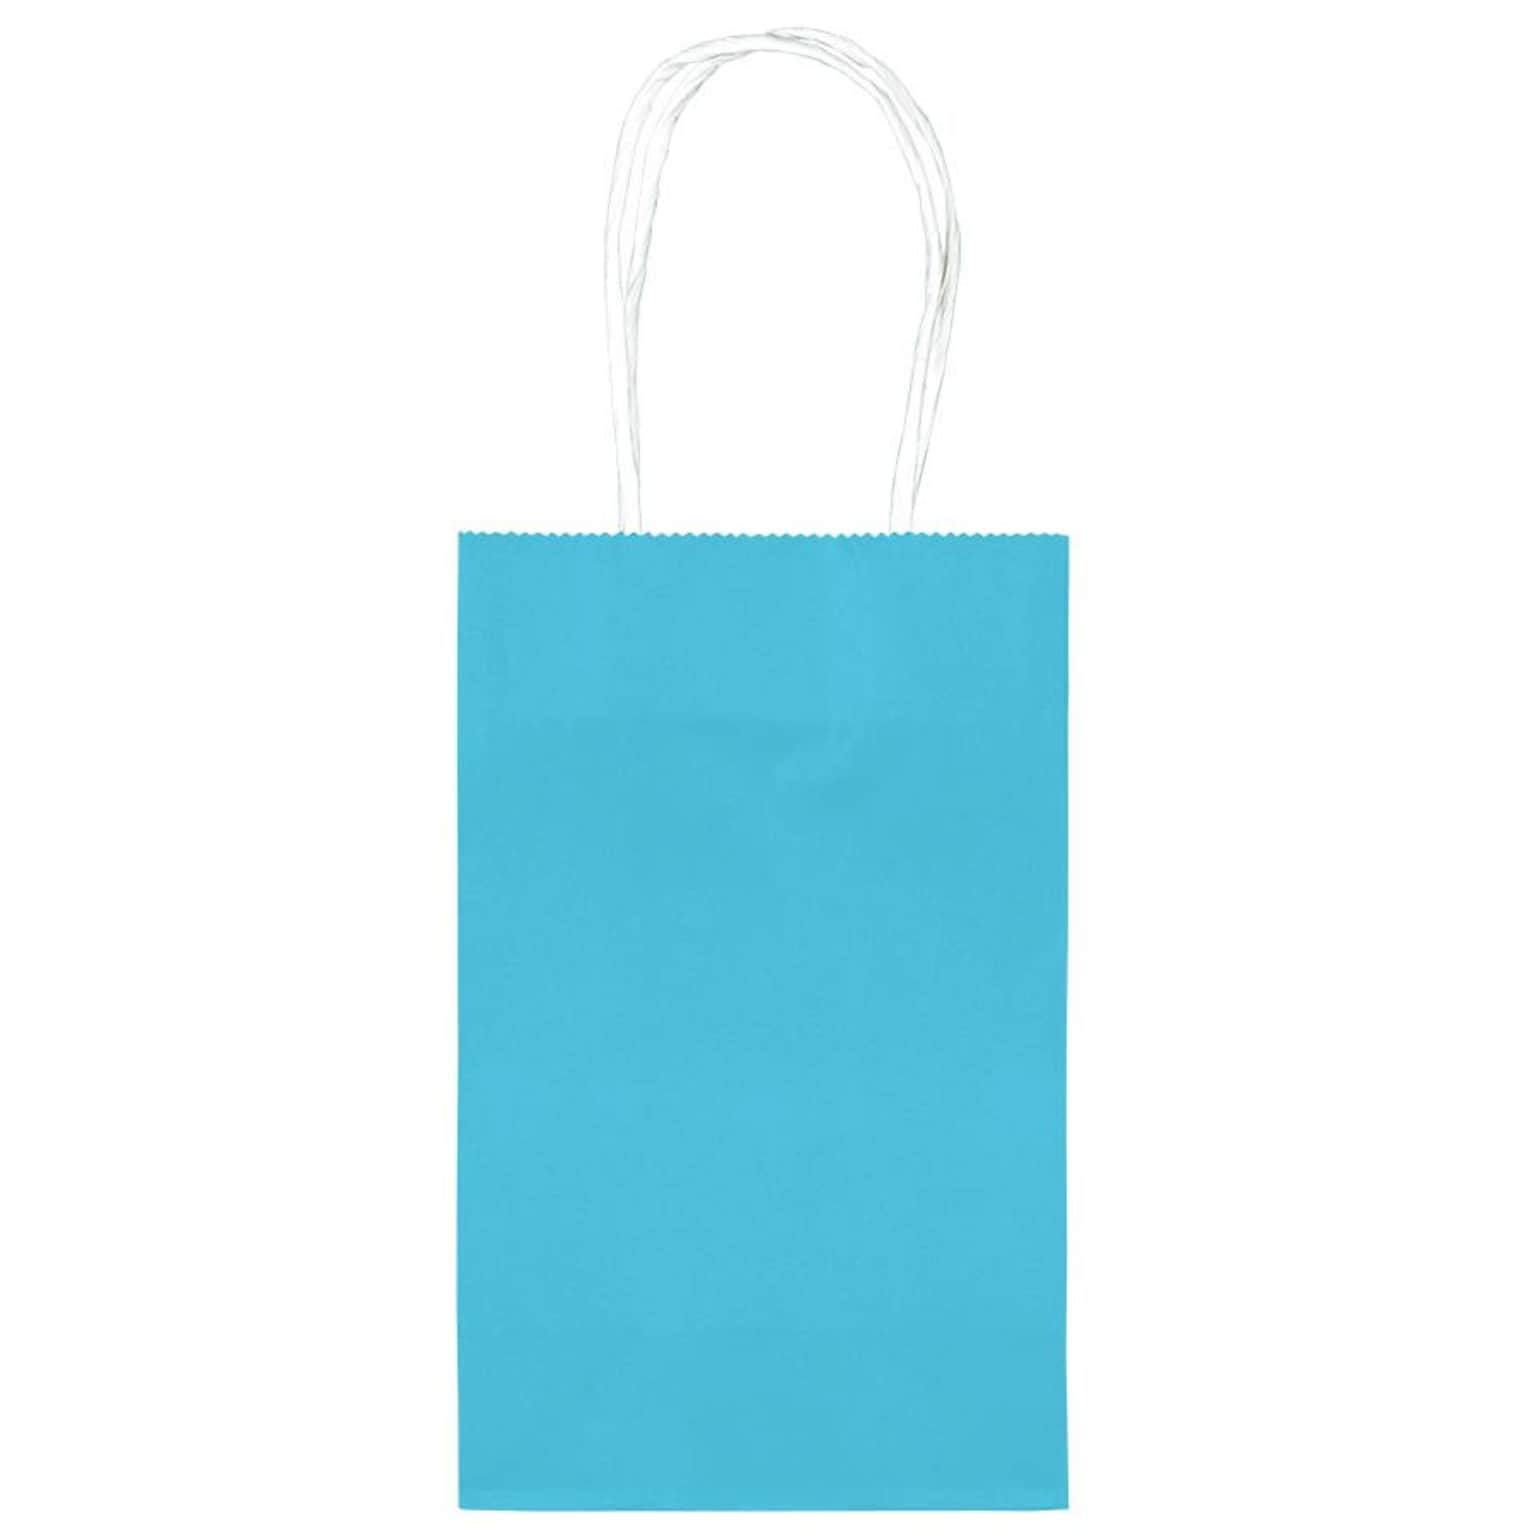 Amscan Cub Bags Value Pack, Turquoise, 4 Bags/Pack (162500.54)